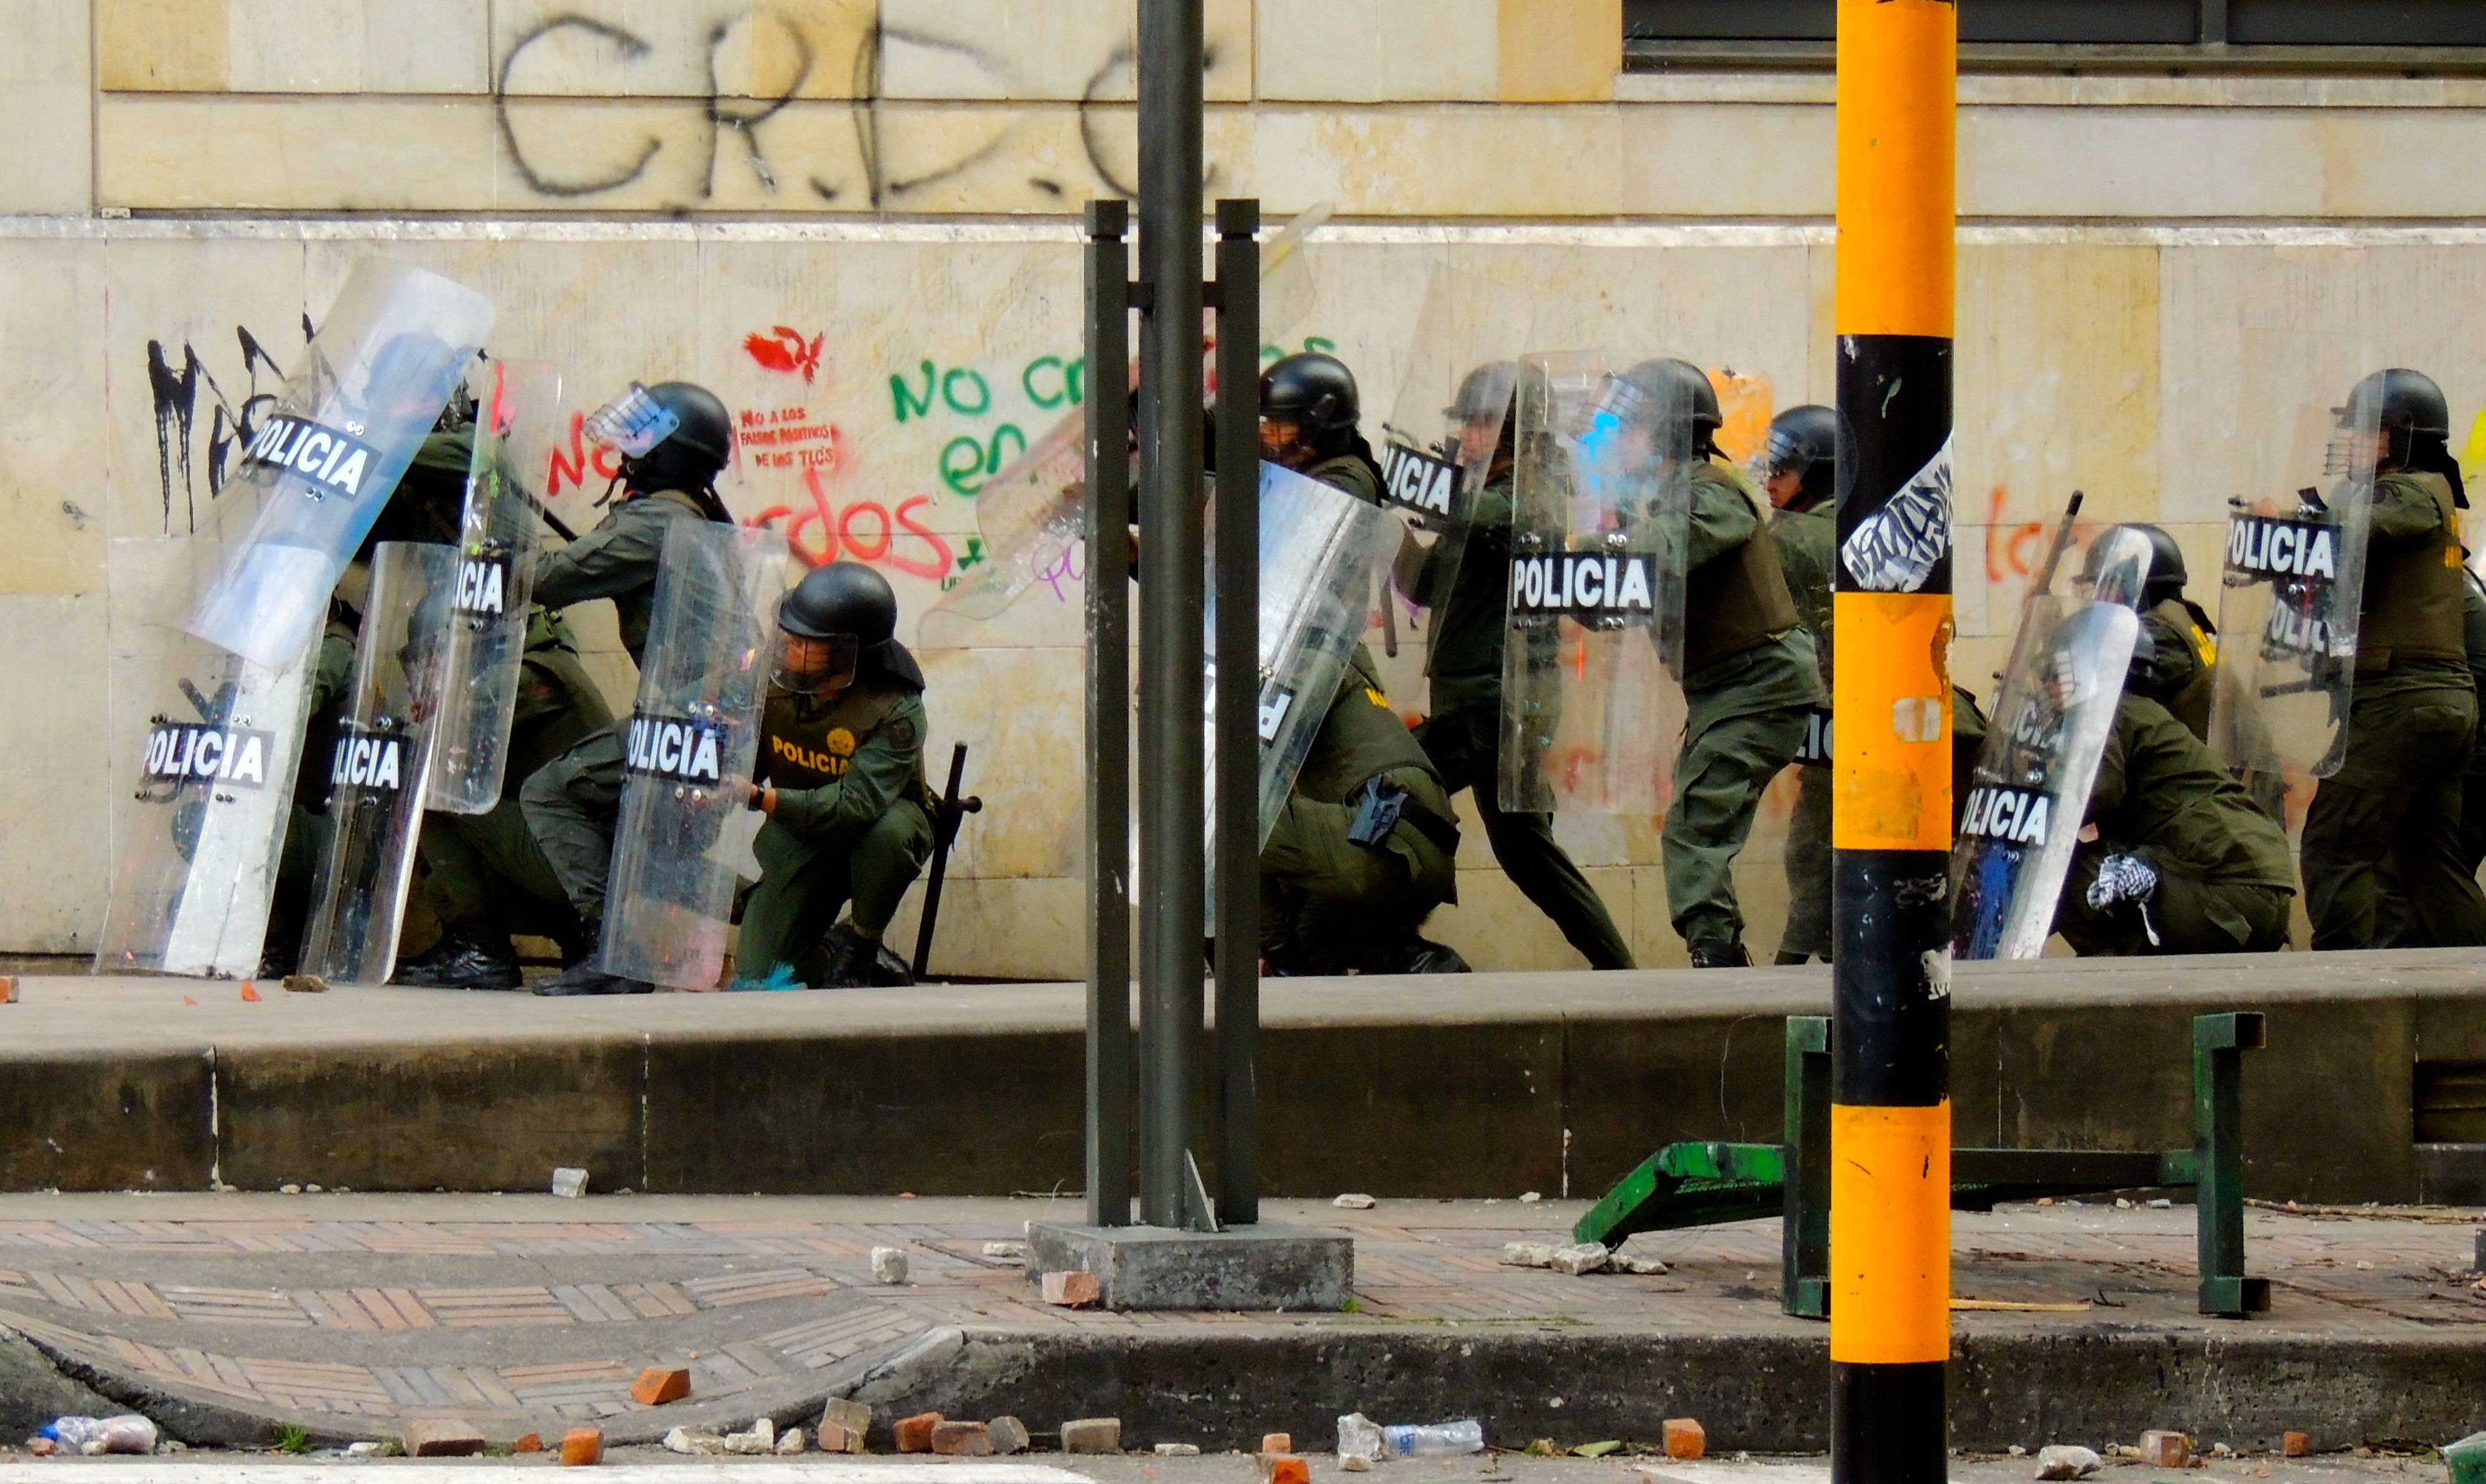 http://scpfoundation.net/local--files/scp-1434/protest_bogota_police_riot%281%29.jpg